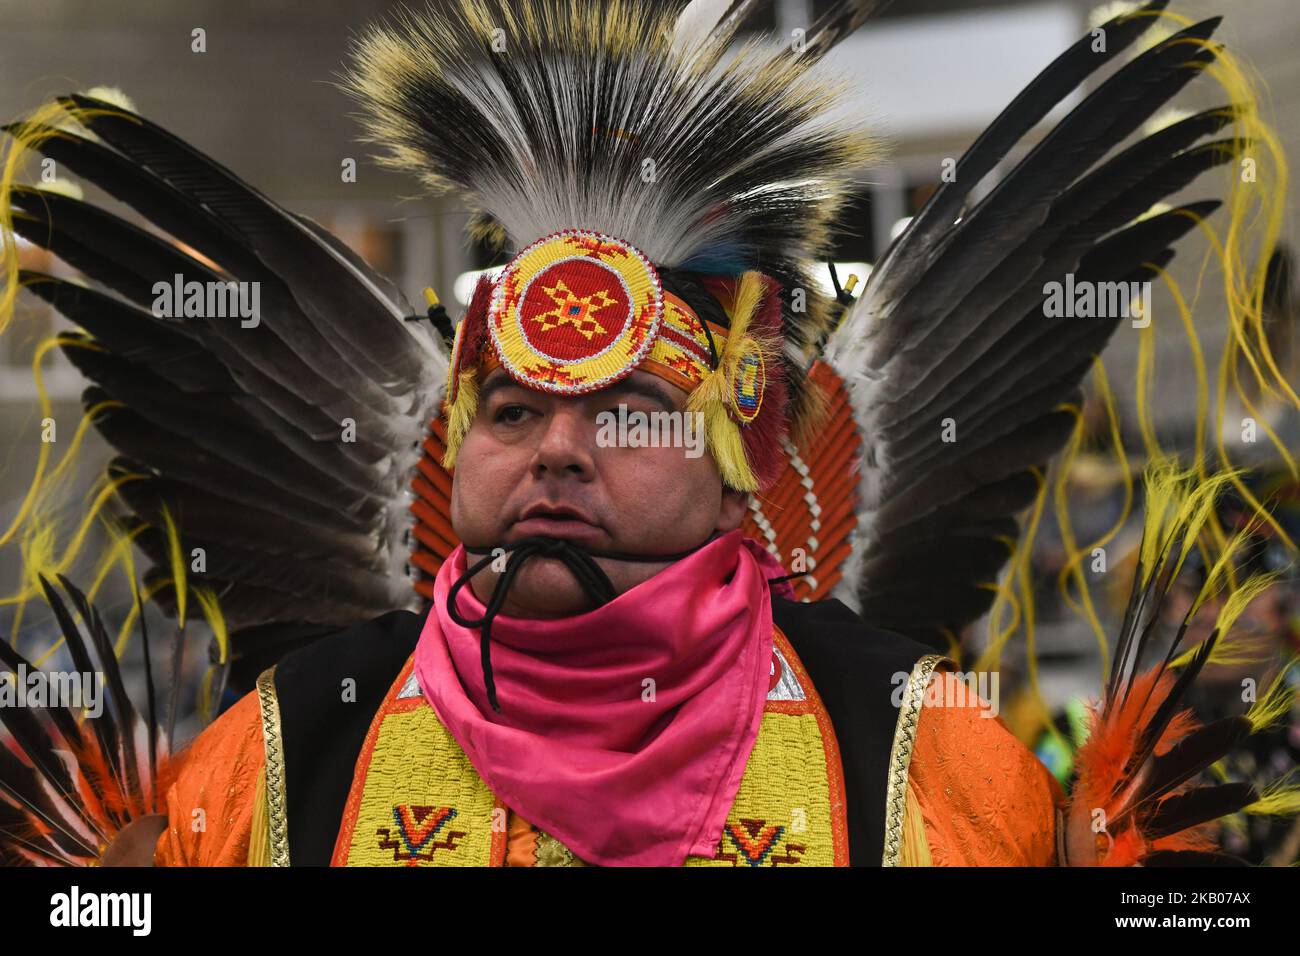 A member of the First Nations during the third annual traditional Pow Wow competition, at the K-Days Festival in Edmonton. Over 700 First Nations dancers from dozens of different tribes will be featured at K-Days in Edmonton over three days this week. On Tuesday, July 24, 2018, in Edmonton, Alberta, Canada. (Photo by Artur Widak/NurPhoto)  Stock Photo